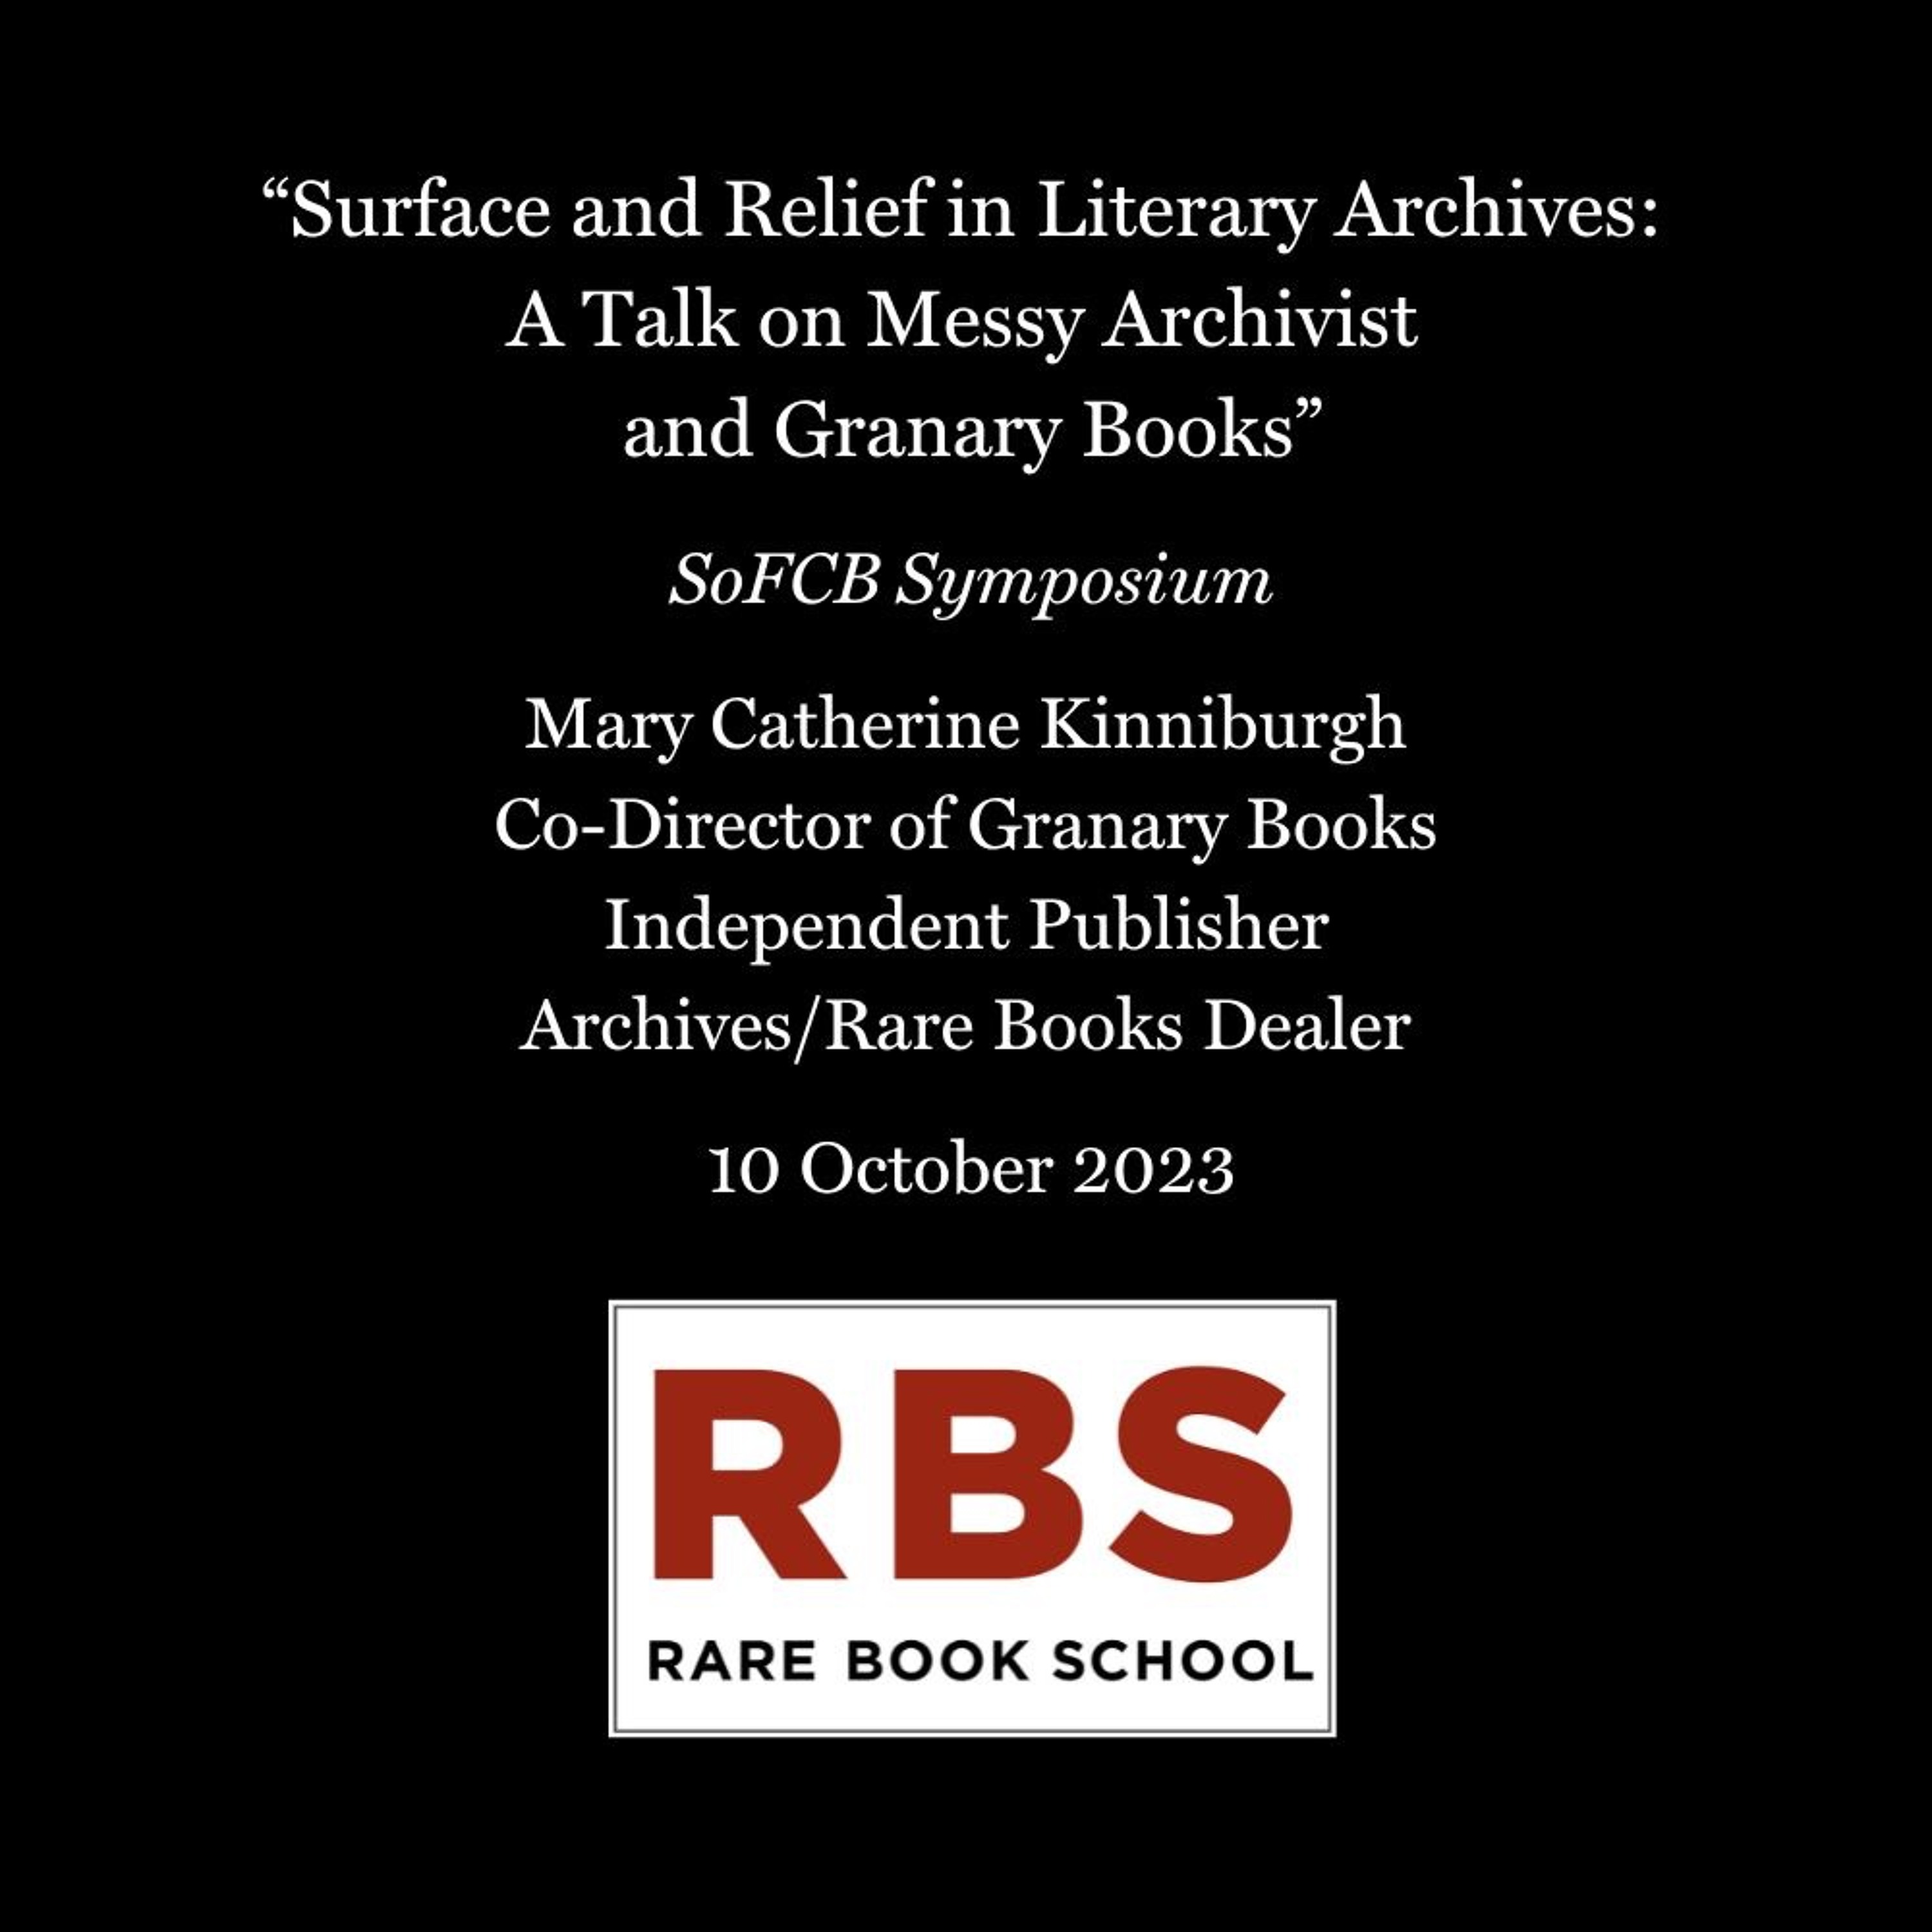 Kinniburgh, Mary Catherine - ”Surface and Relief in Literary Archives” - SoFCB, 10 Oct 2023